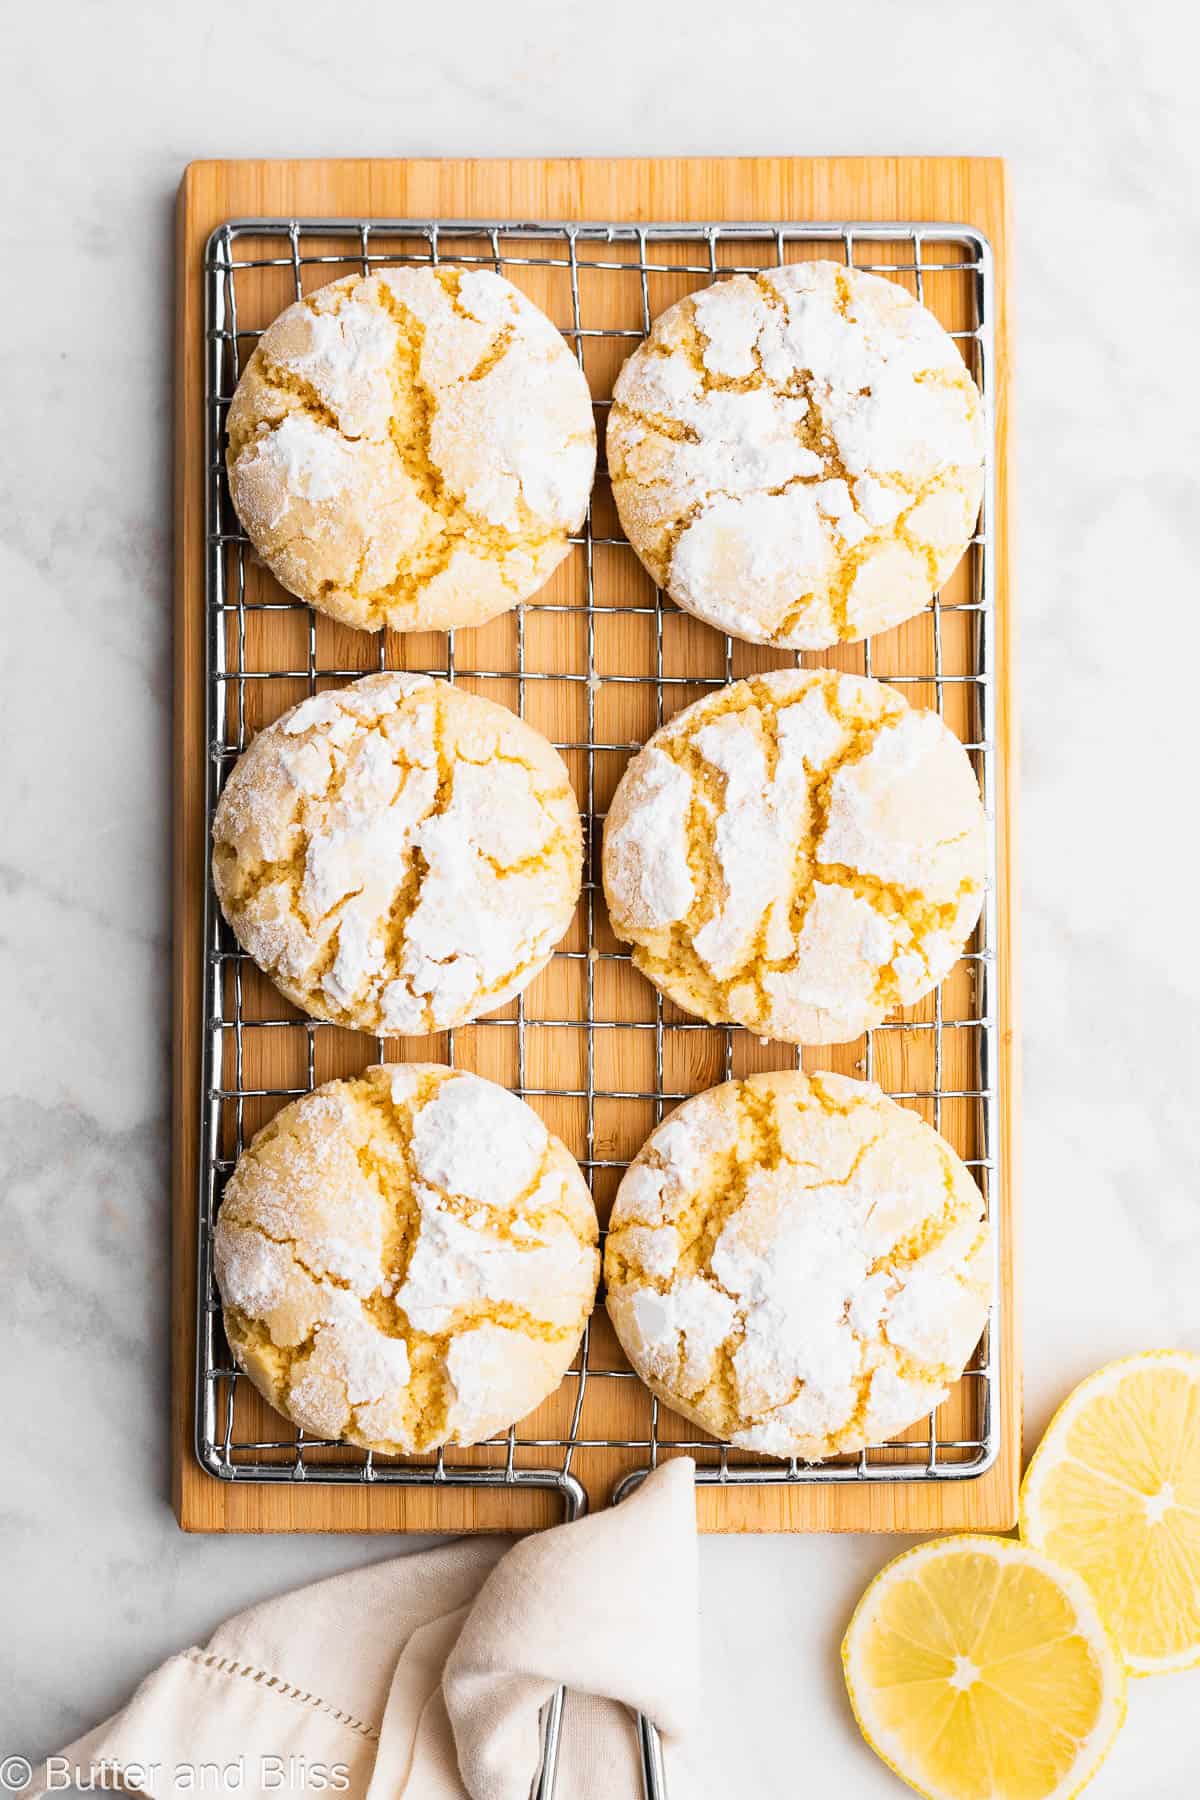 Fresh baked gluten free lemon crinkle cookies cooling on a wire rack.